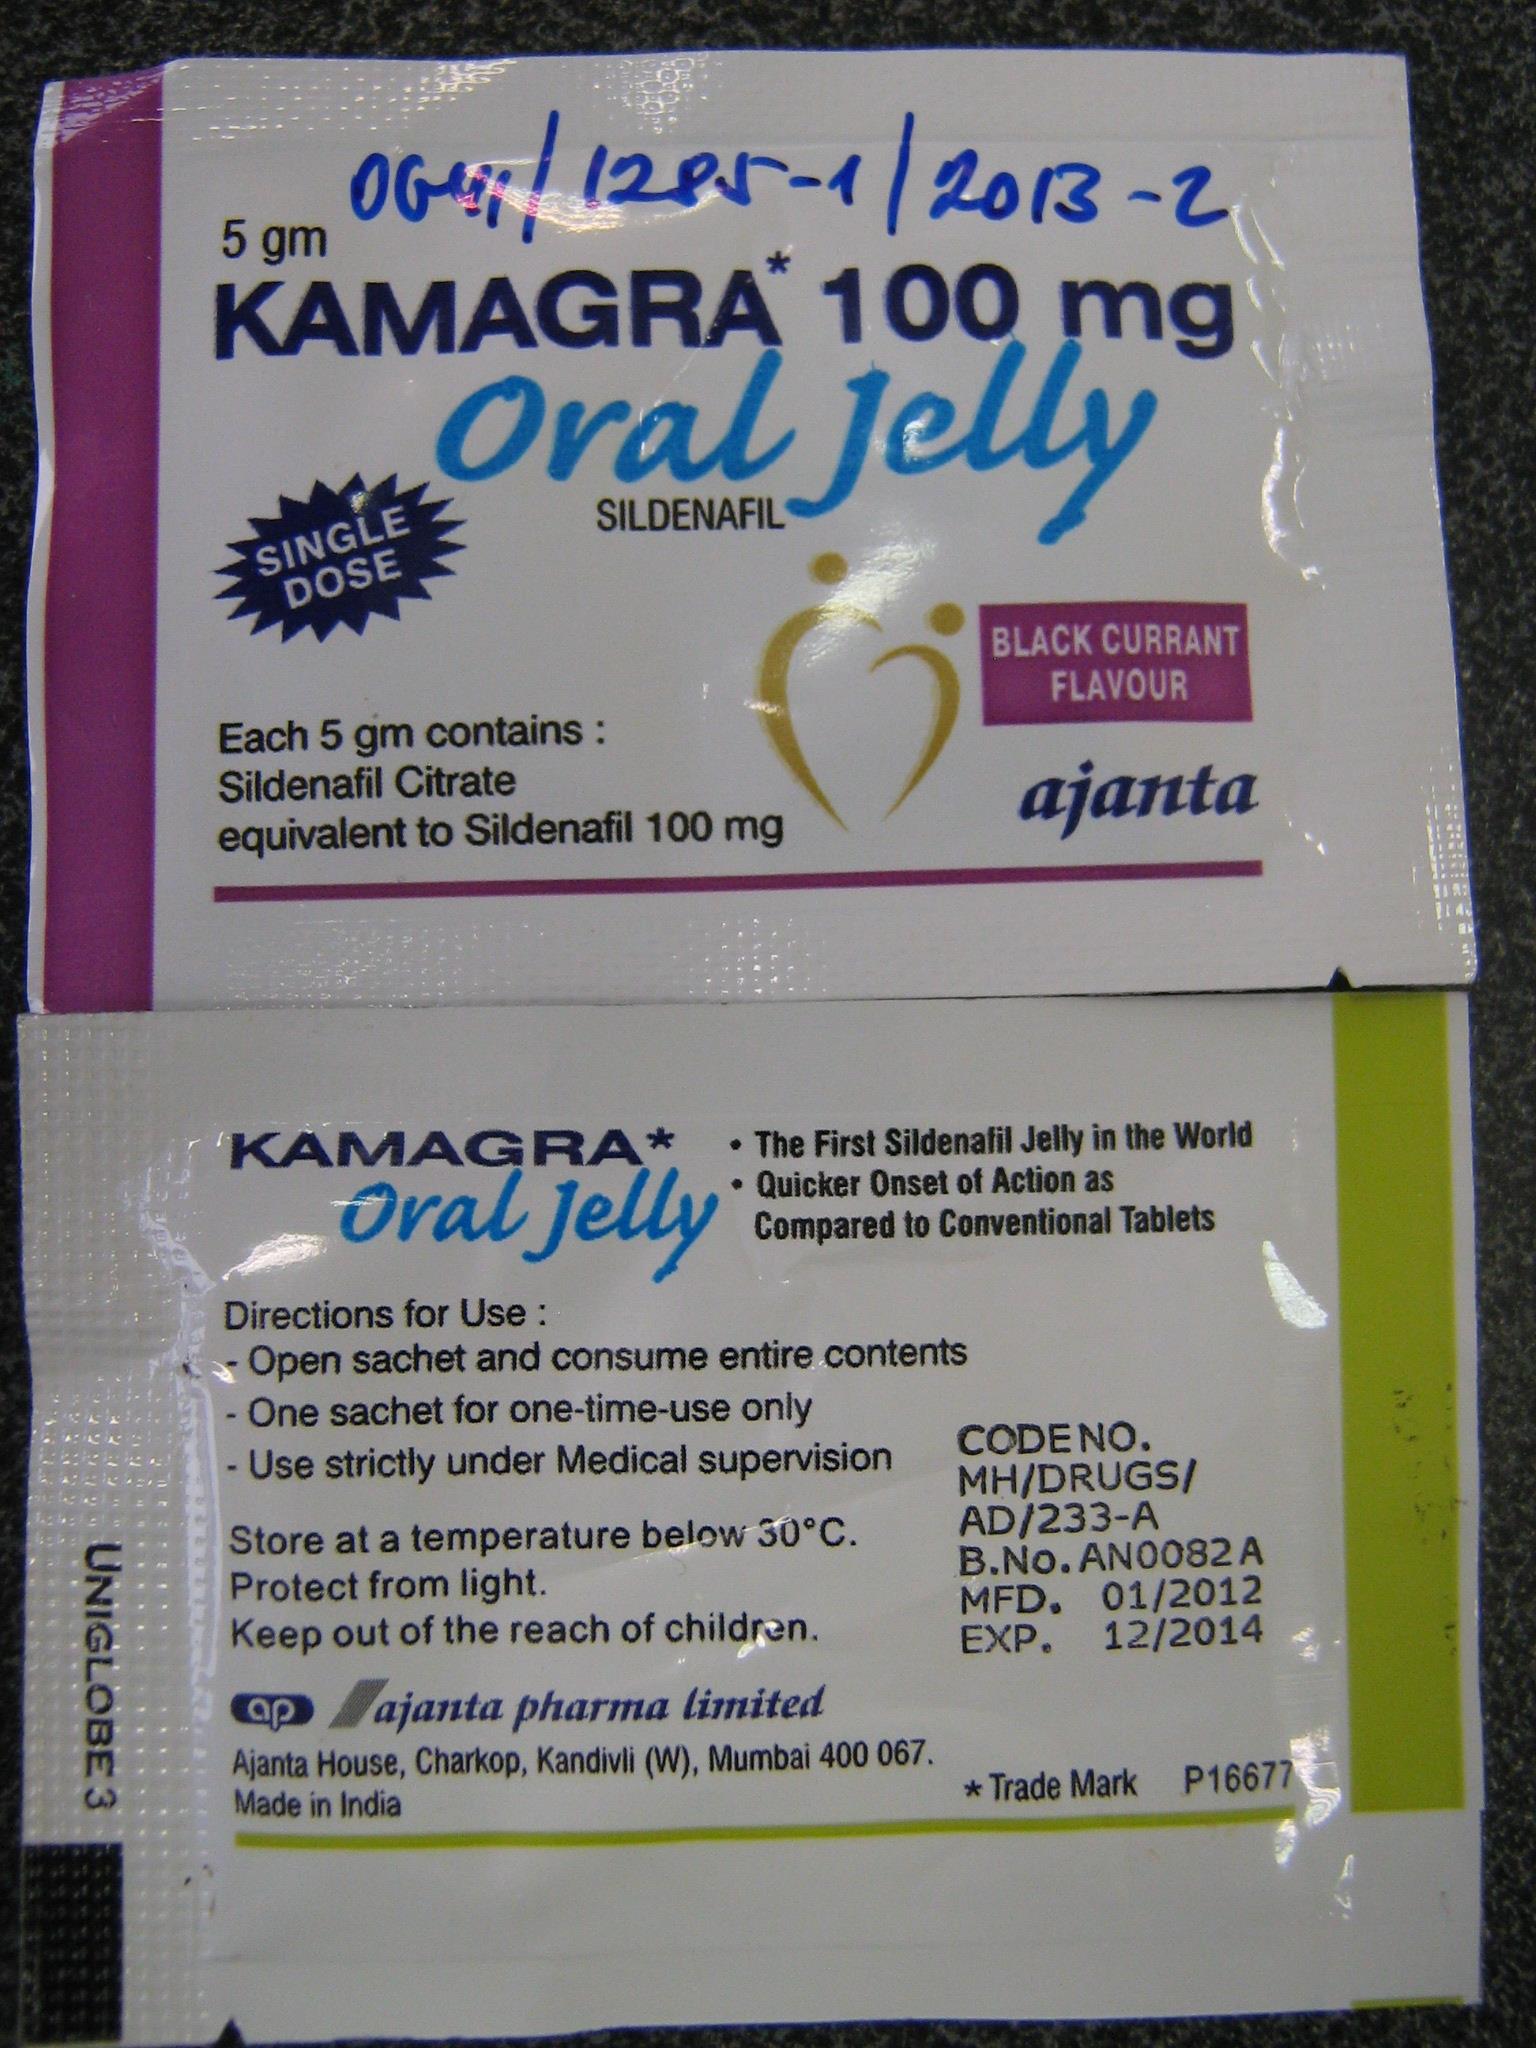 Image of the illigal product: Kamagra Oral Jelly